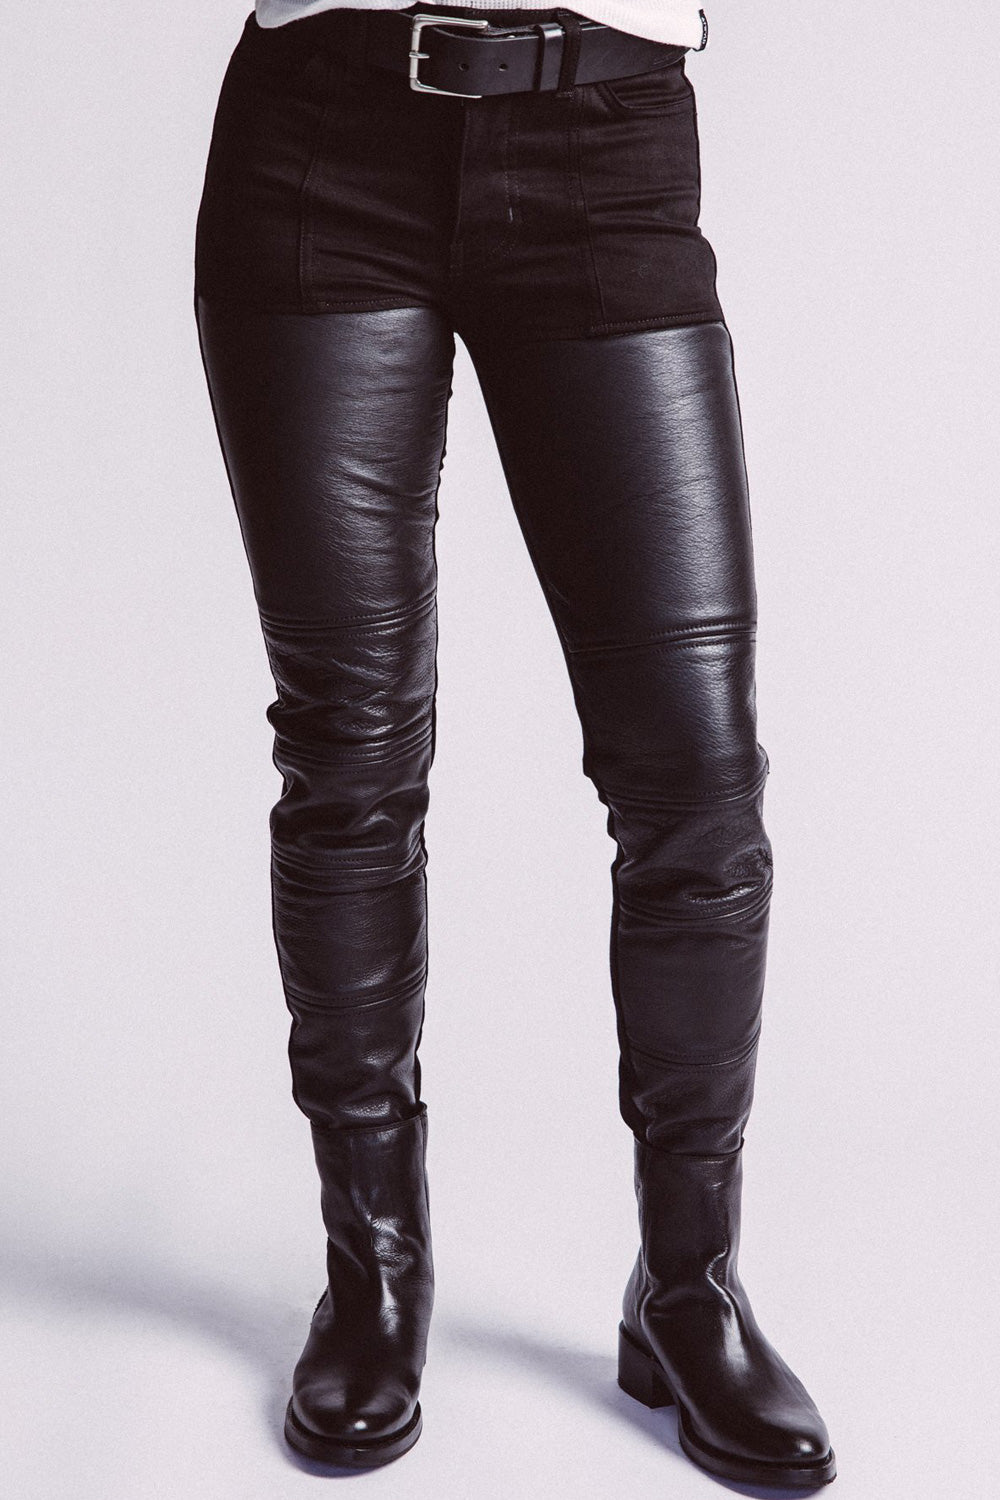 Leather Pants for Women's, Leather Pants Motorcycle Pants High